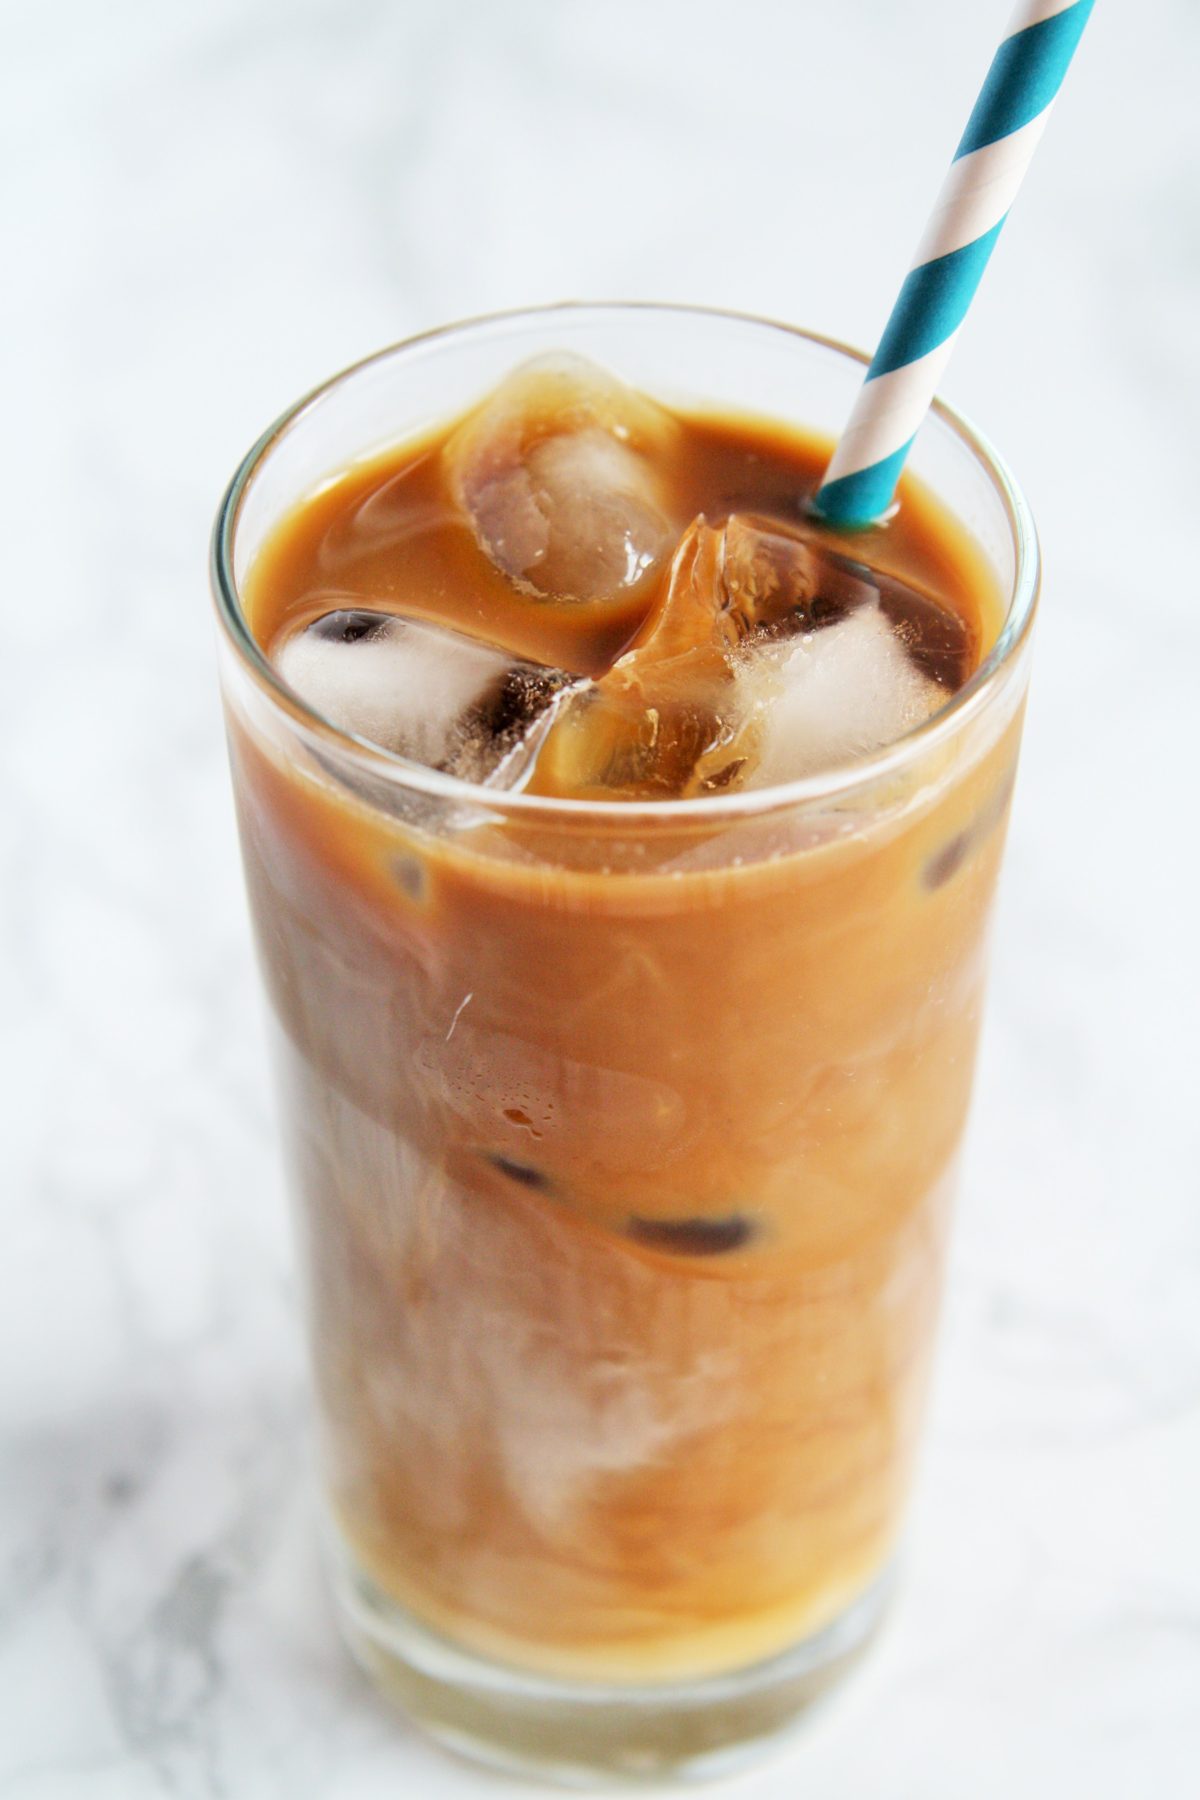 Learn how to make the best overnight cold brew coffee at home - easy, inexpensive, and no special equipment needed! The end result is delicious smooth coffee with less acidity than regular coffee. 